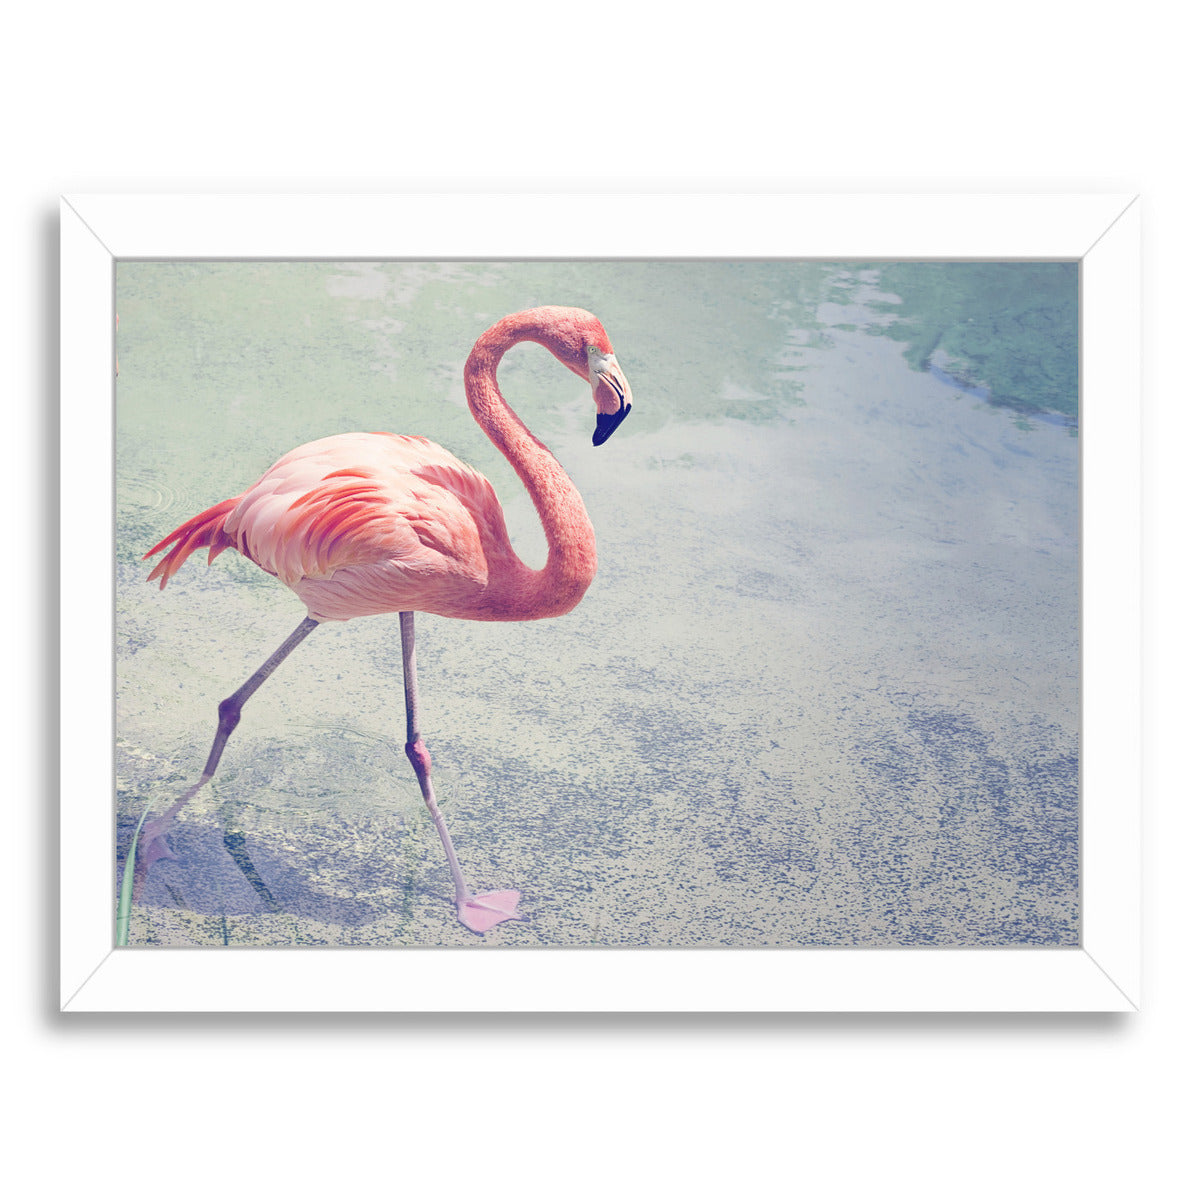 Flamingo Strut By The Gingham Owl - White Framed Print - Wall Art - Americanflat